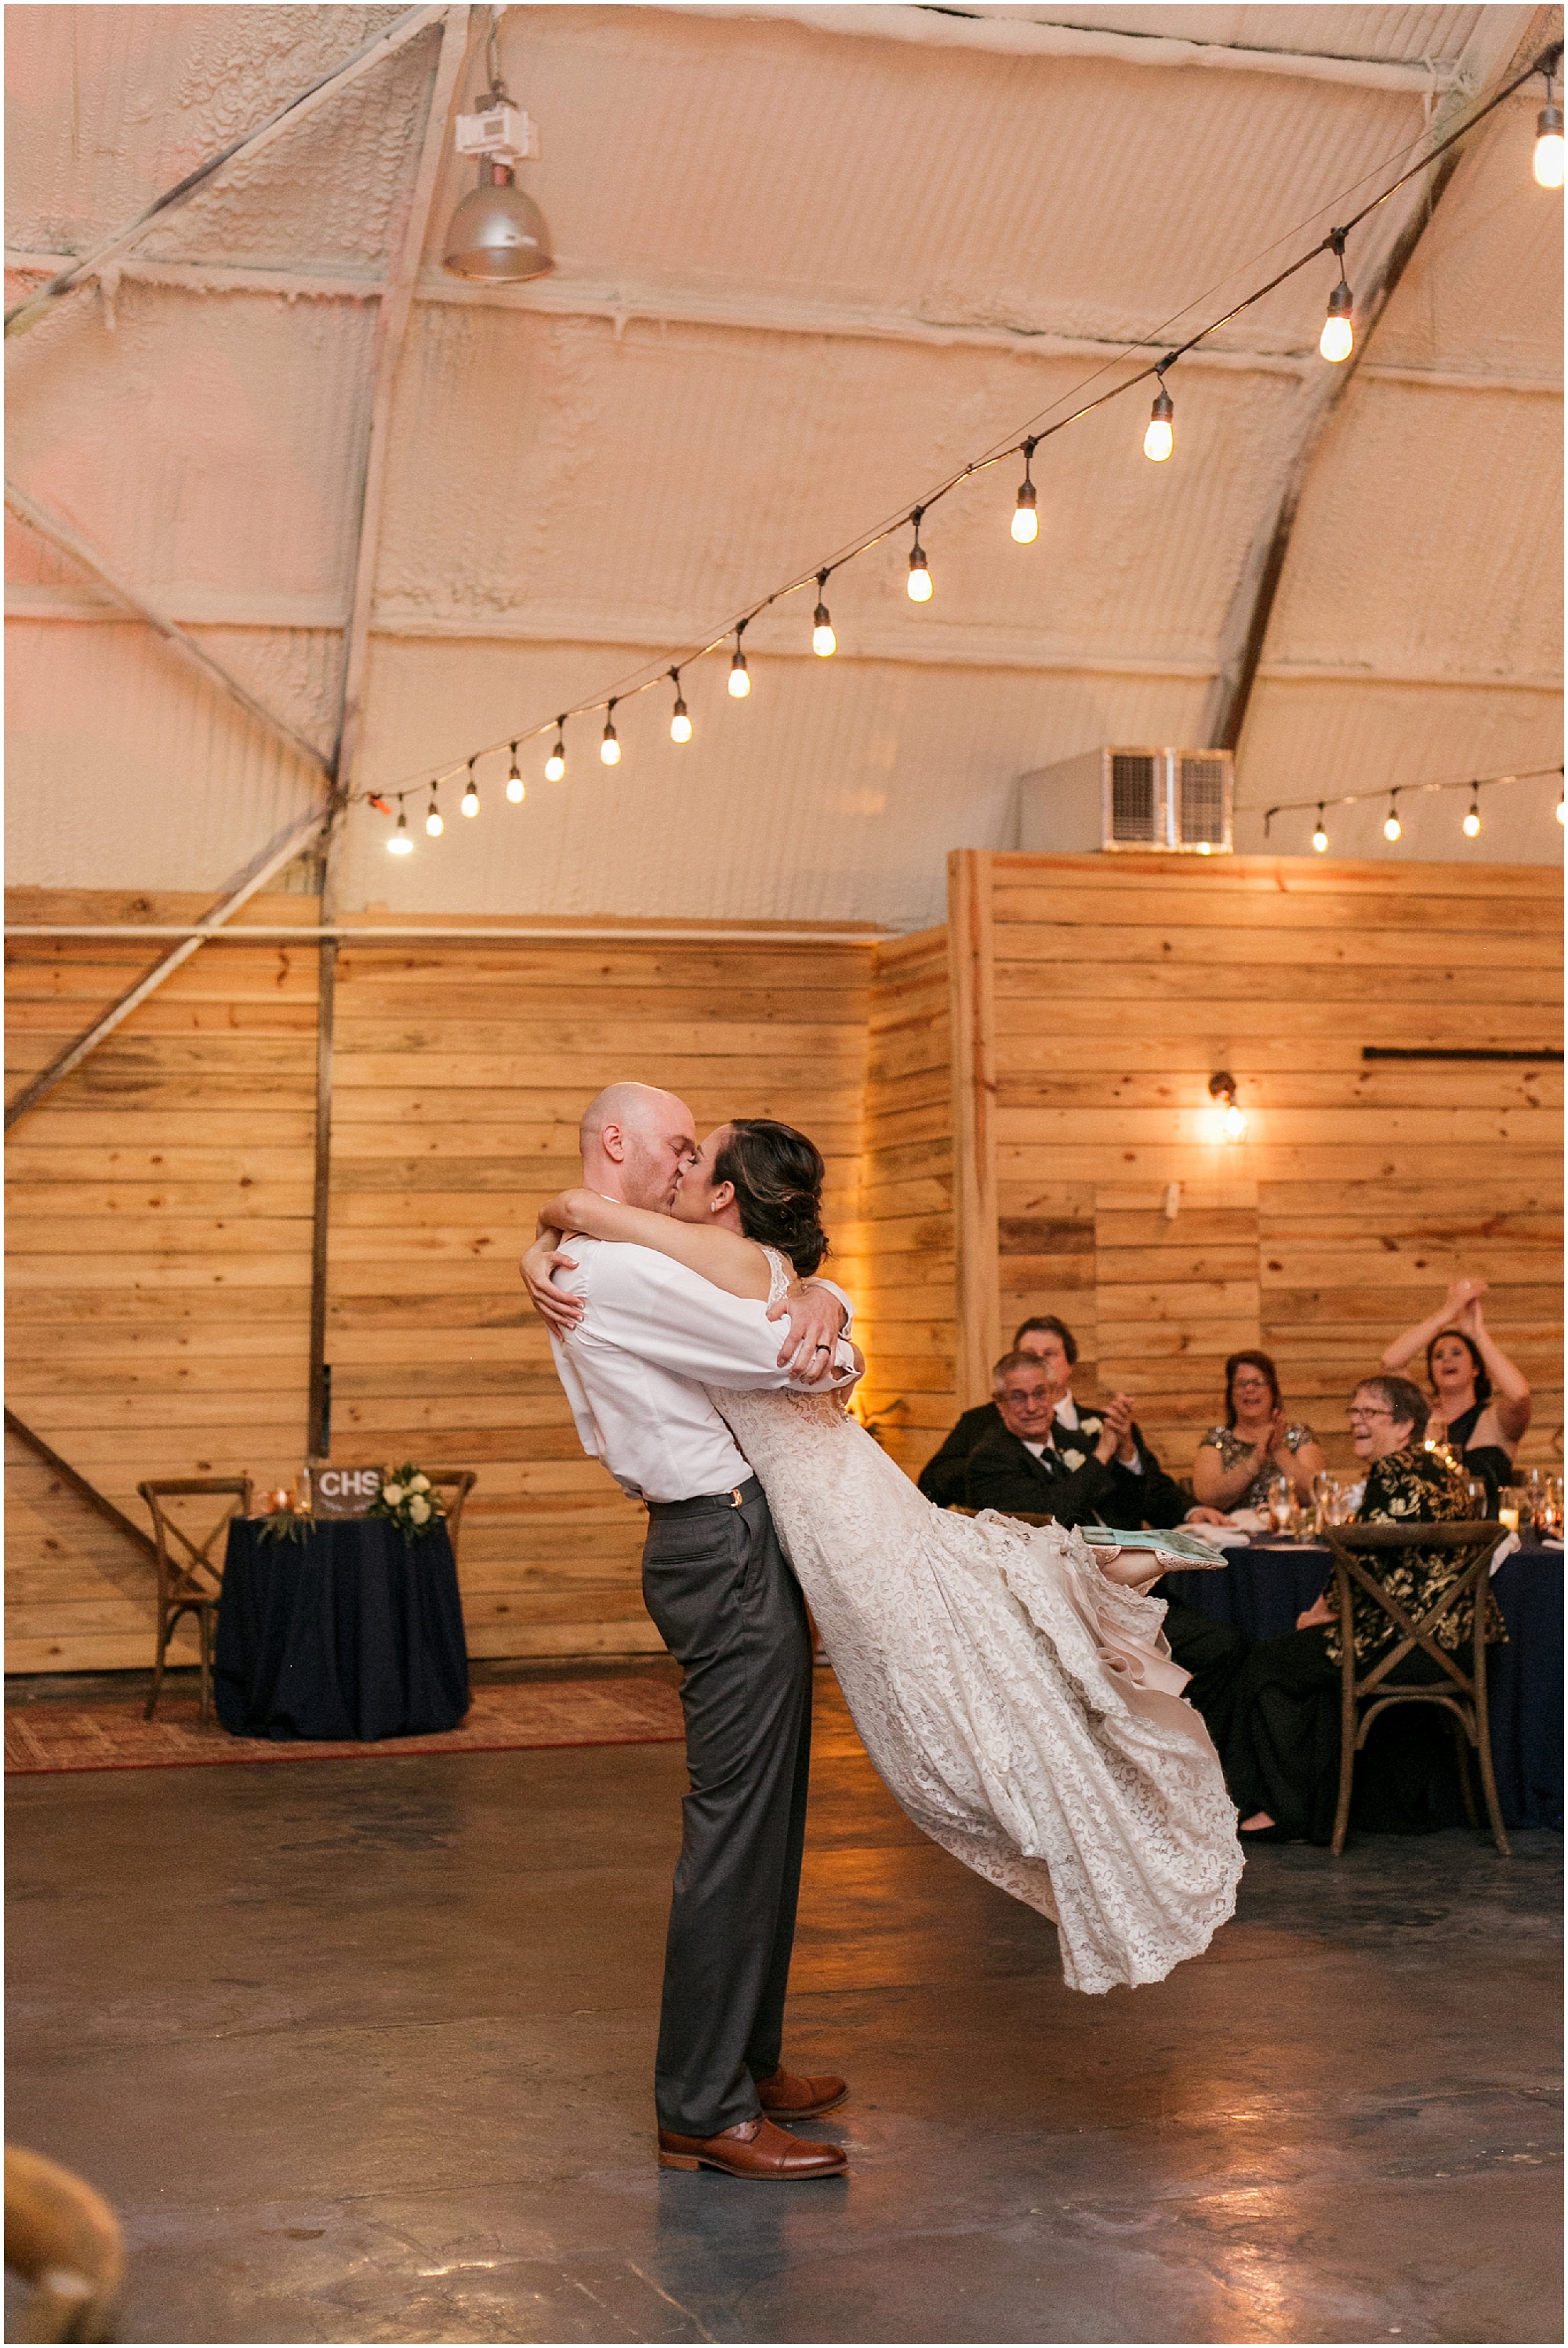 Bride and groom kiss at the end of their first dance.